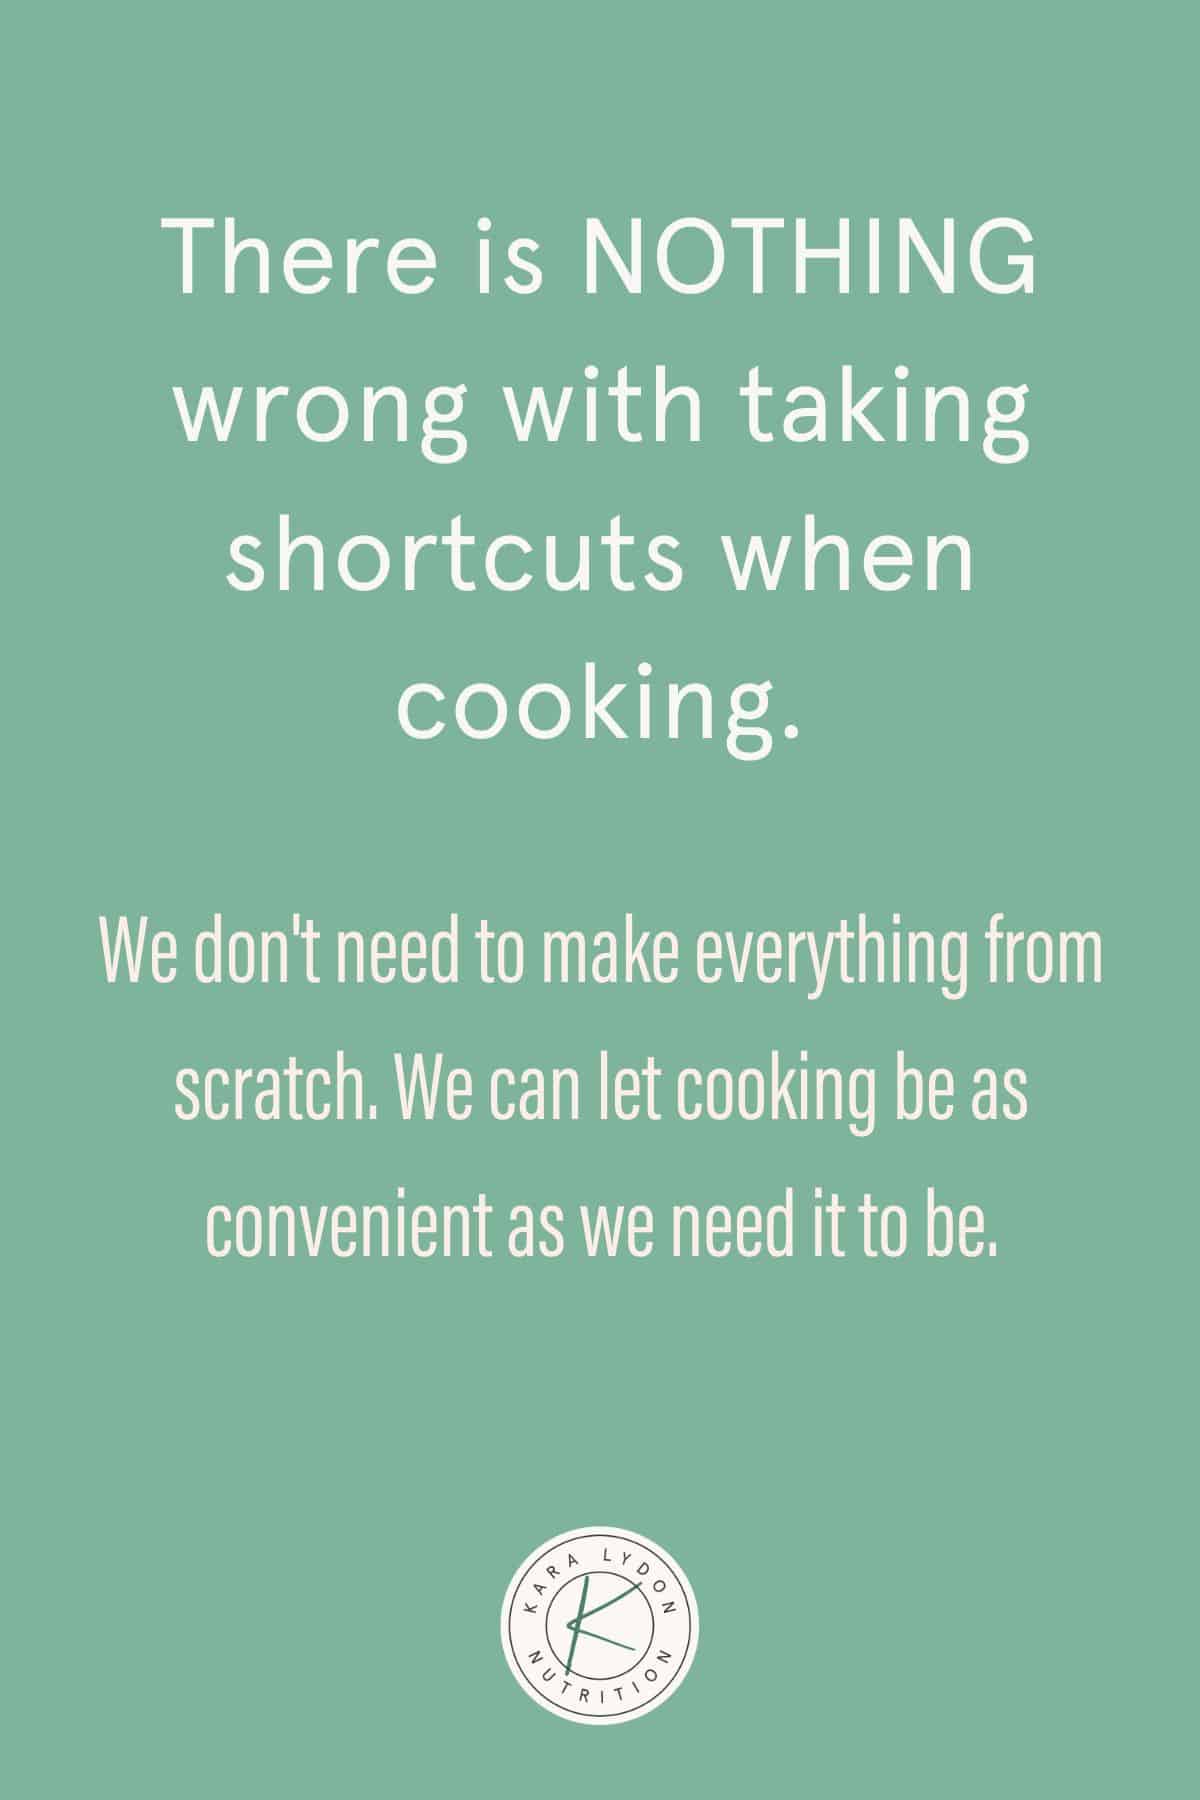 Graphic with quote: "There is nothing wrong with taking shortcuts when cooking. We don't need to make everything from scratch. We can let cooking be as convenient as we need it to be."